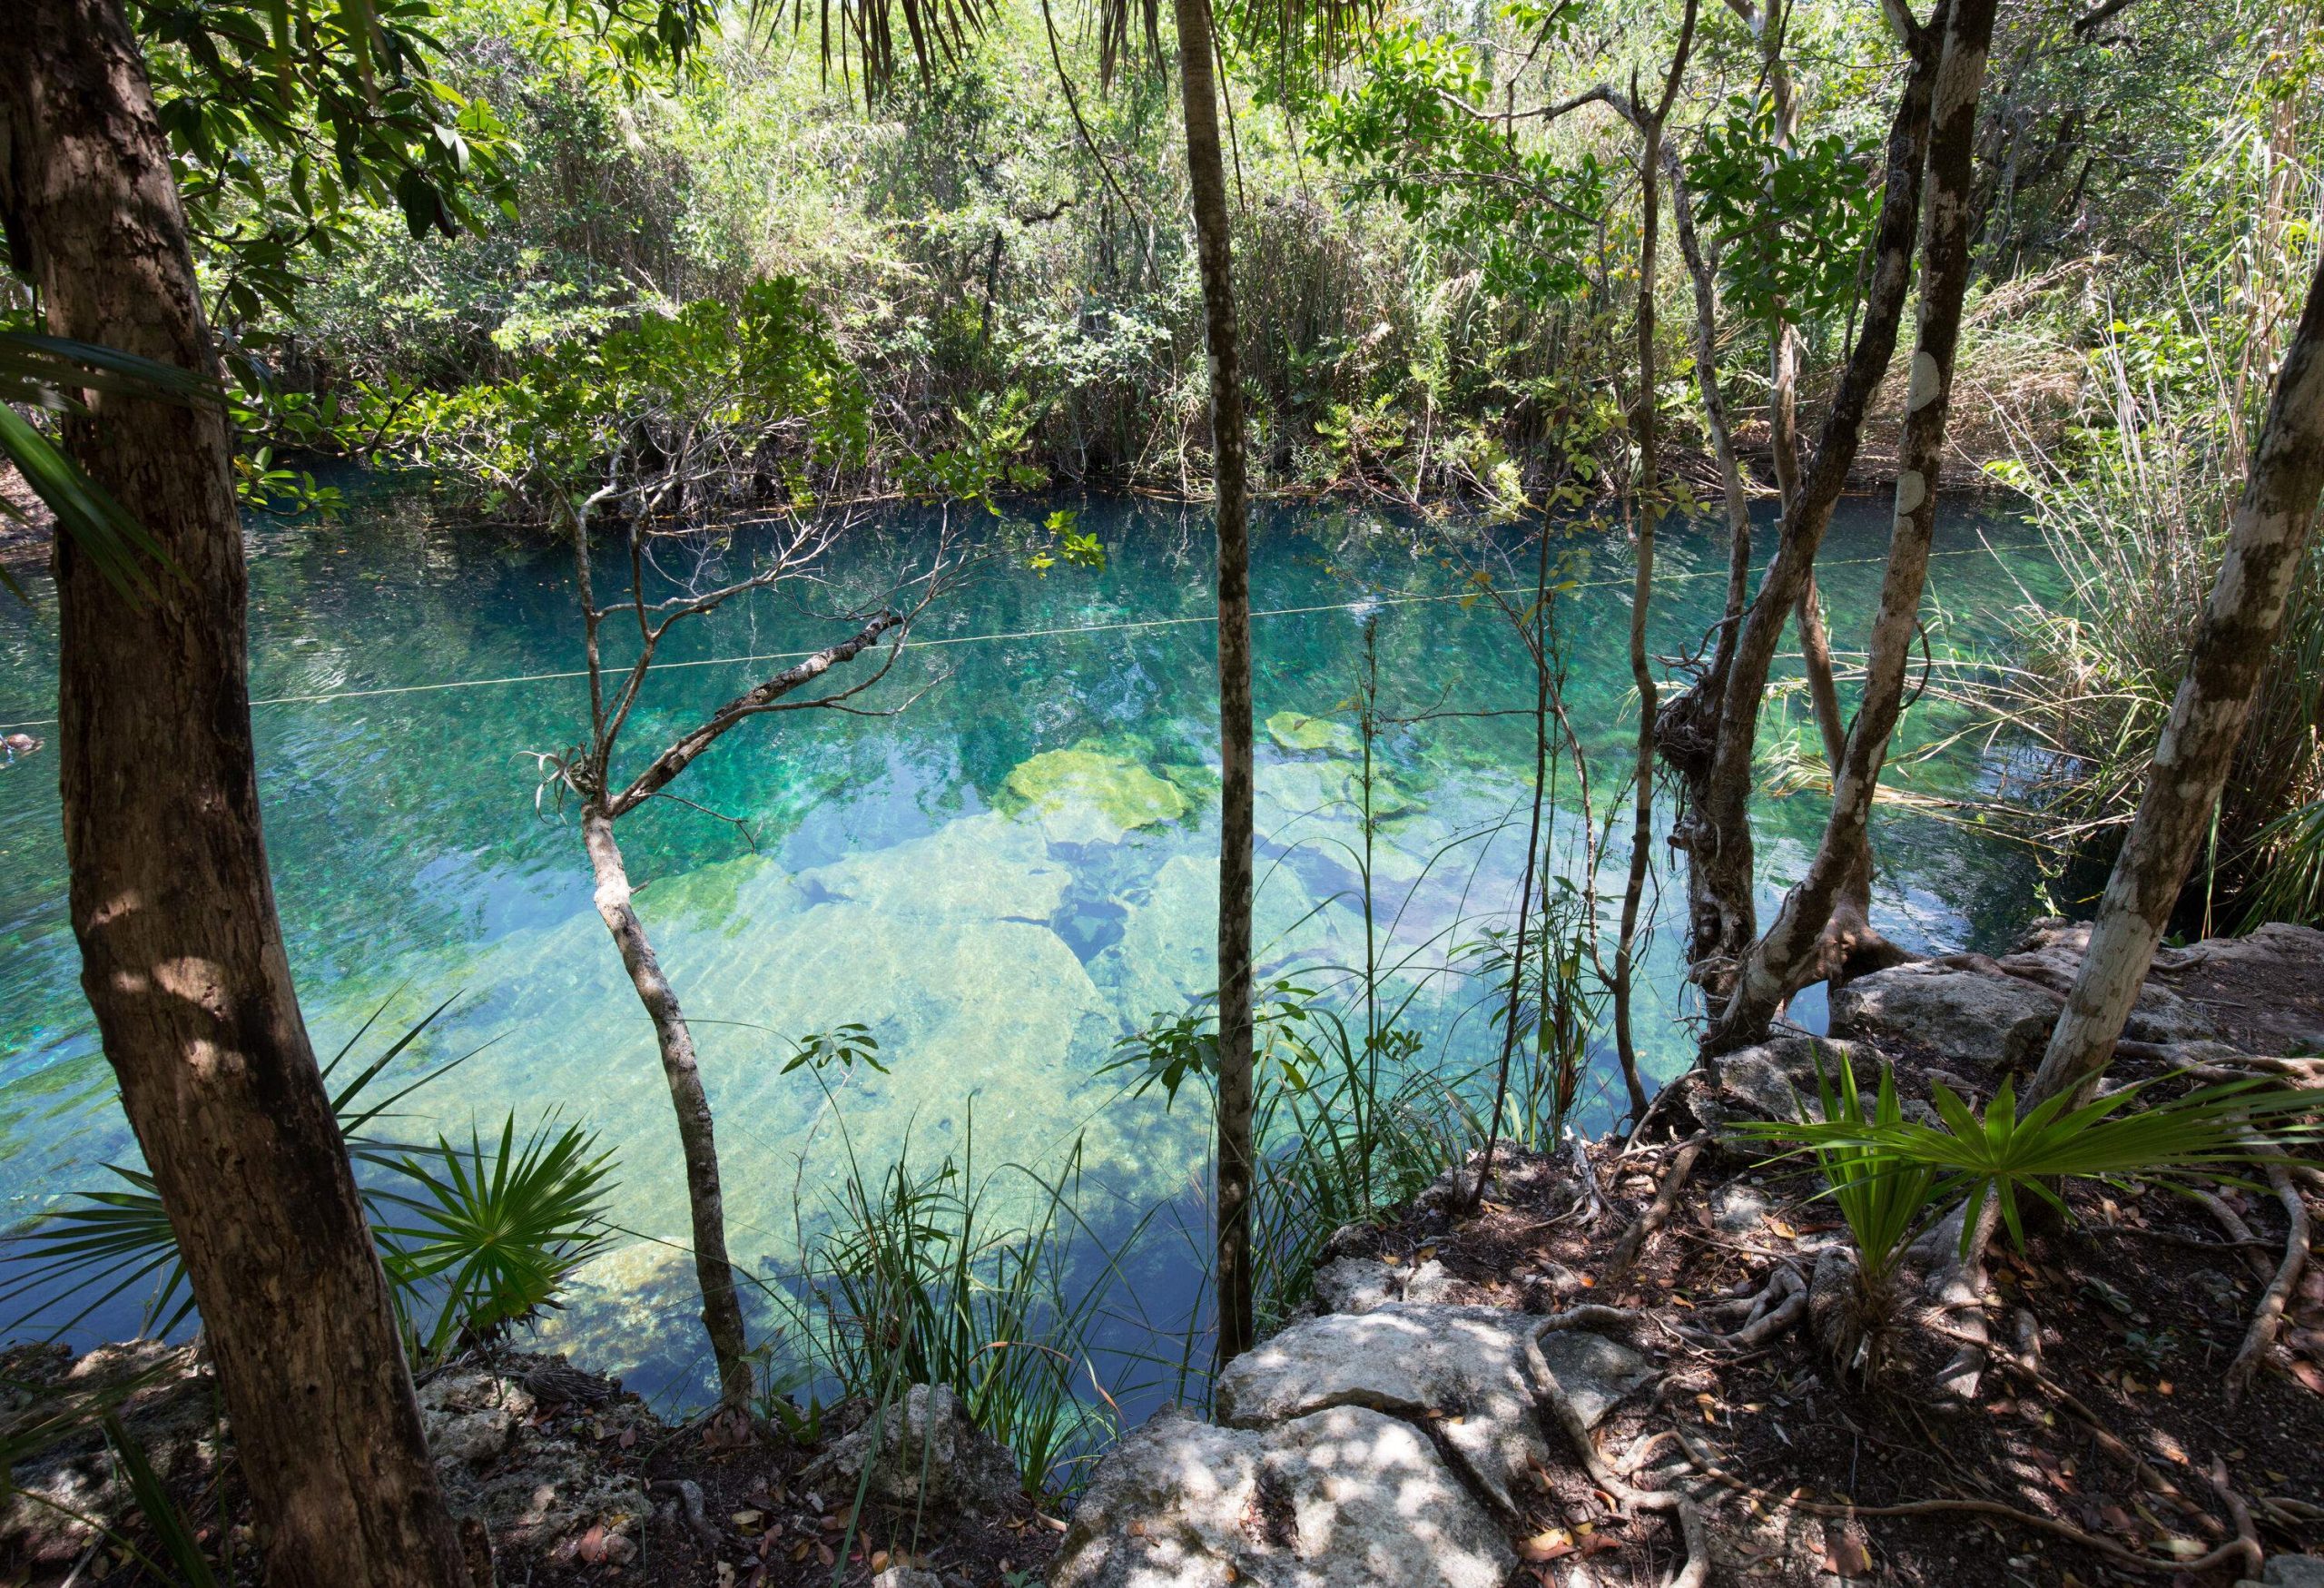 A clear body of water surrounded by a dense foliage.